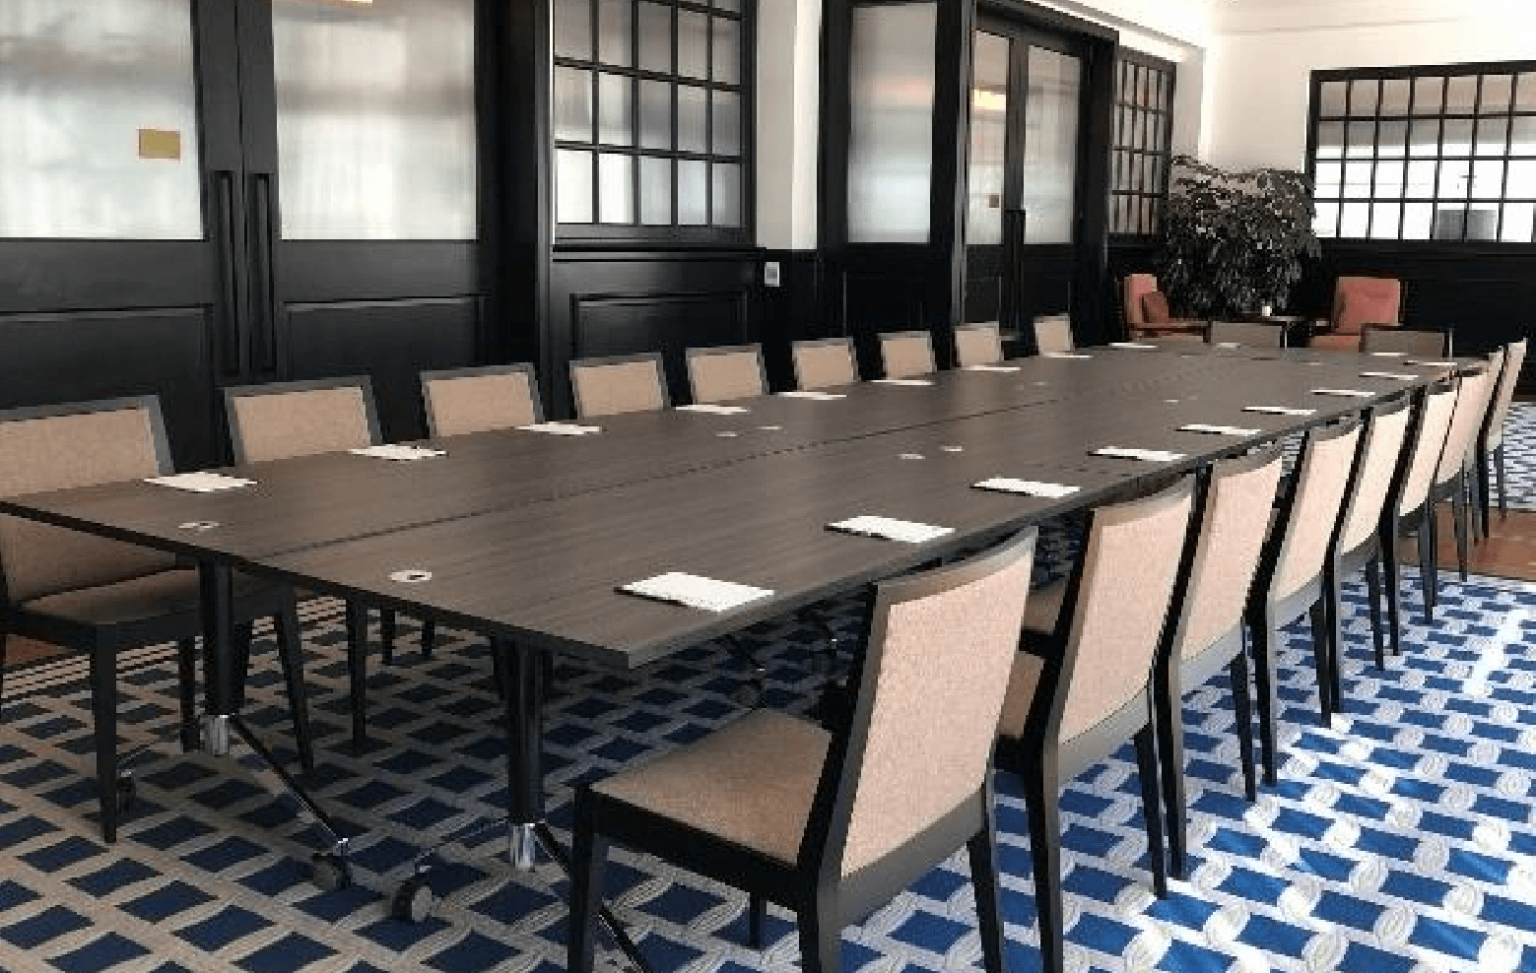 Conference room in a Newport, RI hotel with a long rectangular table, several chairs, and a patterned blue carpet, featuring large windows and indoor plants.